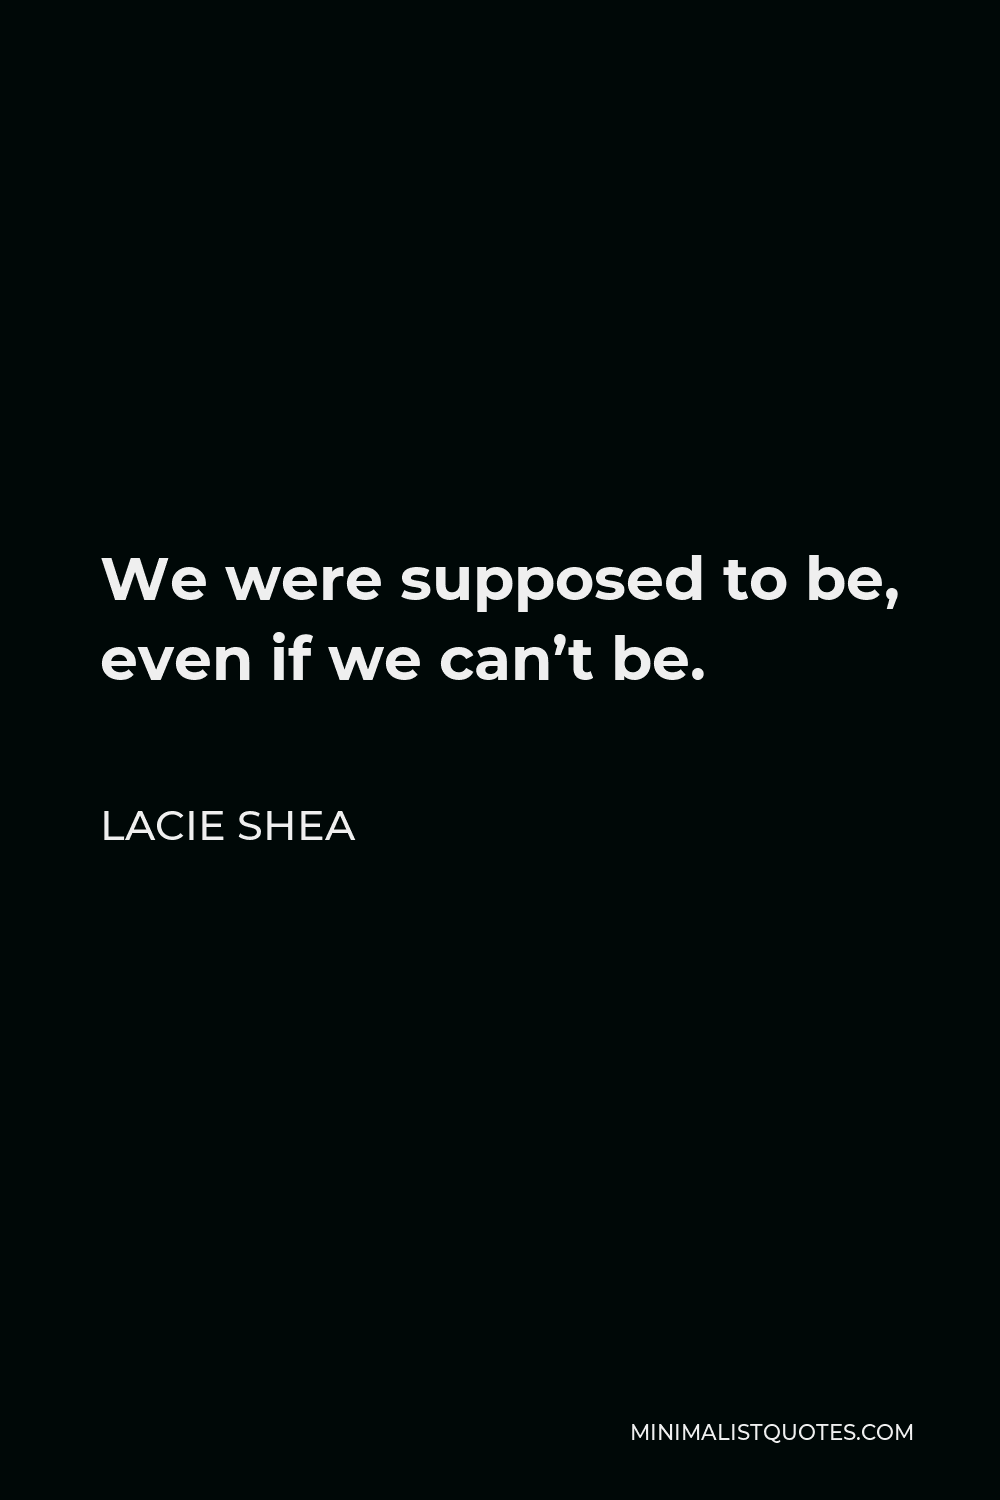 Lacie Shea Quote - We were supposed to be, even if we can’t be.